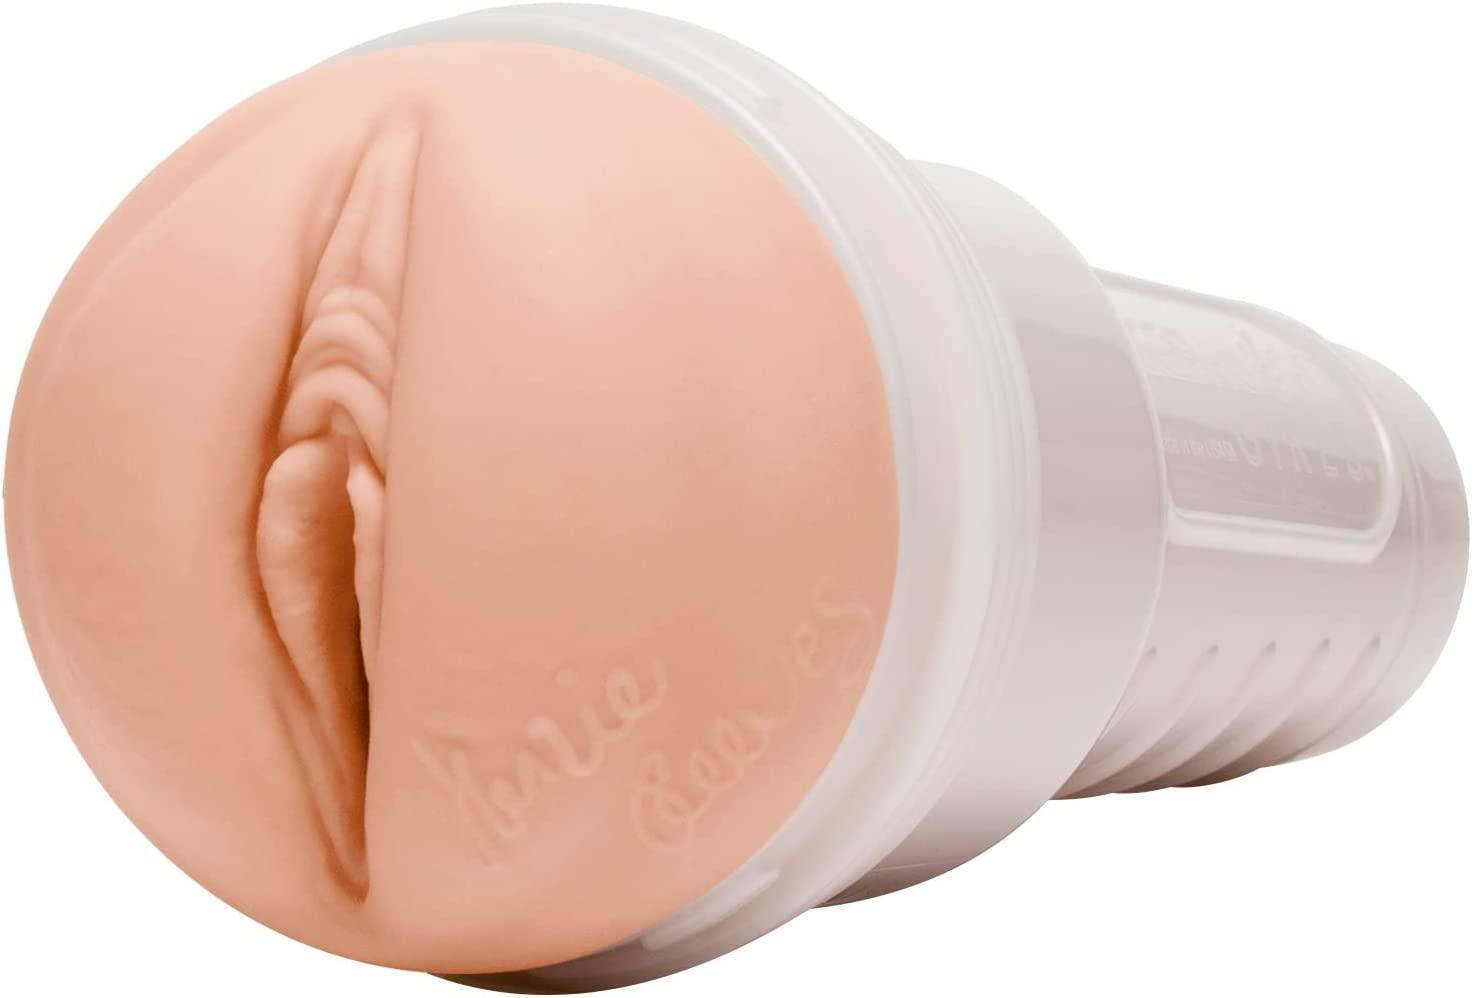 Fleshlight Girls Kenzie Reeves Cream Puff - Buy At Luxury Toy X - Free 3-Day Shipping